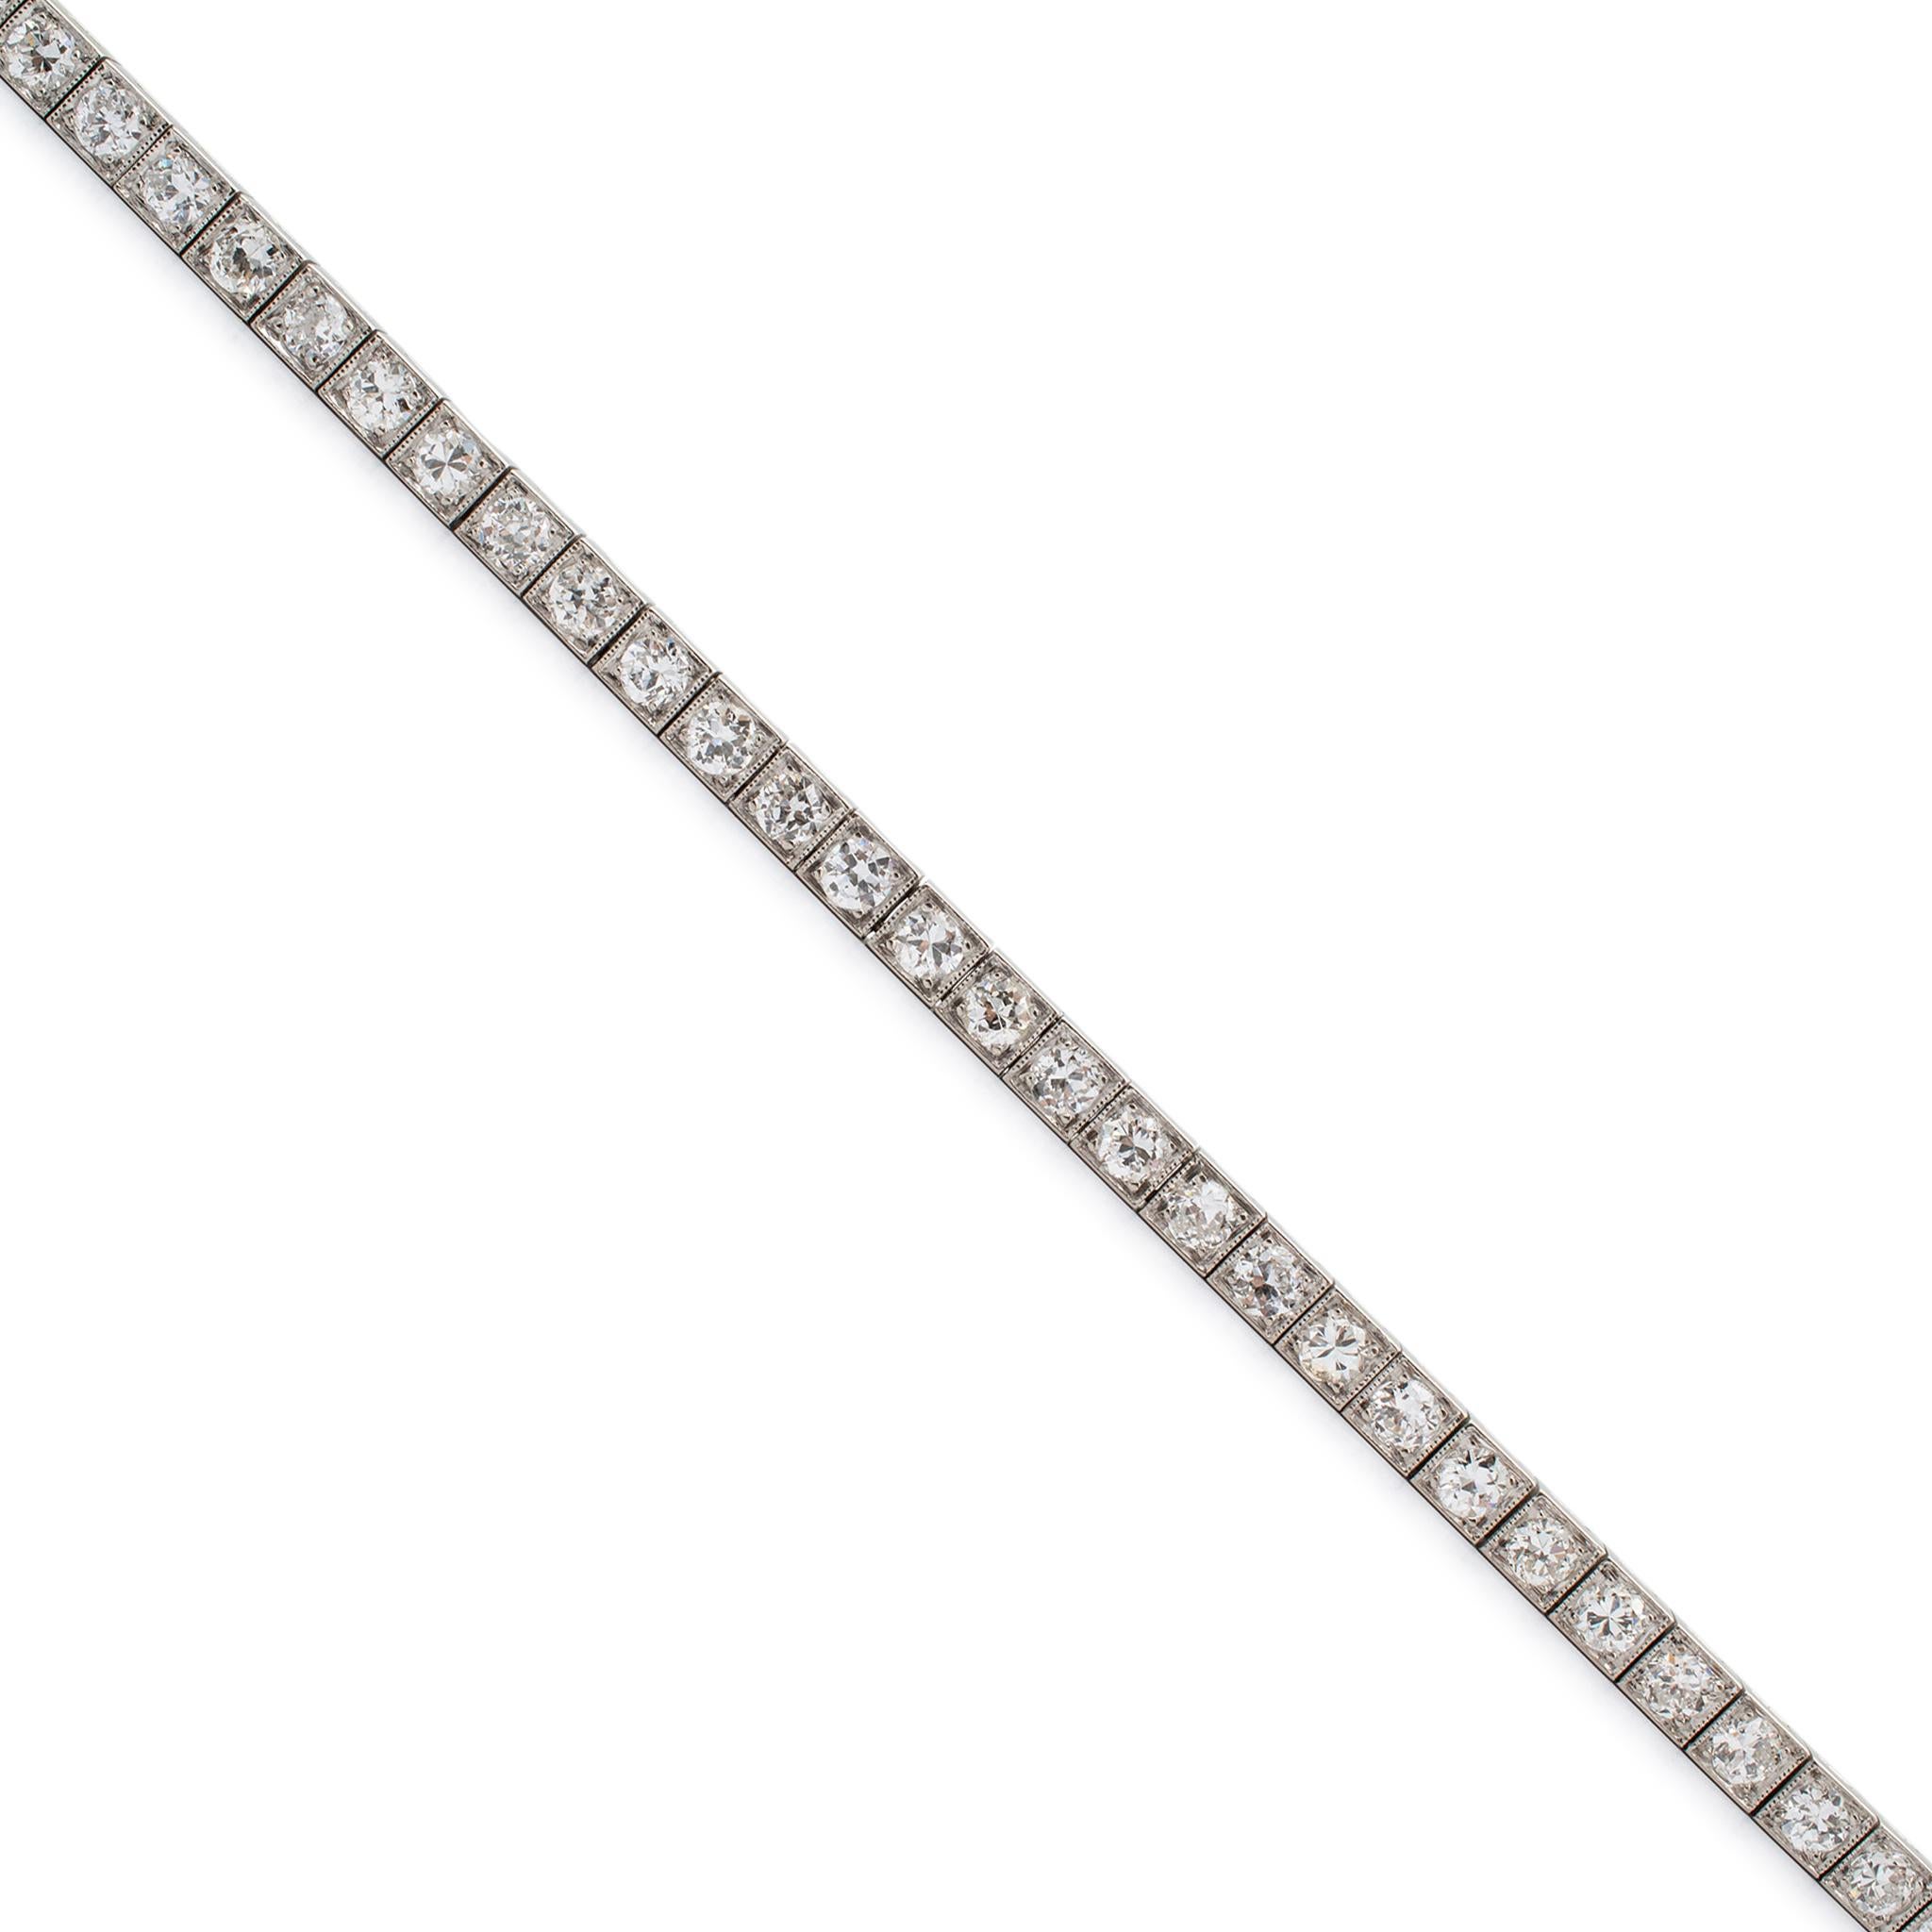 Gender: Ladies

Metal Type: 900 Platinum

Length: 7.00 inches

Width: 3.30 mm

Weight: 15.26 grams

One ladies custom made filigreed 900 platinum, diamond tennis bracelet. The metal was tested and determined to be 900 platinum.

Antique unpolished